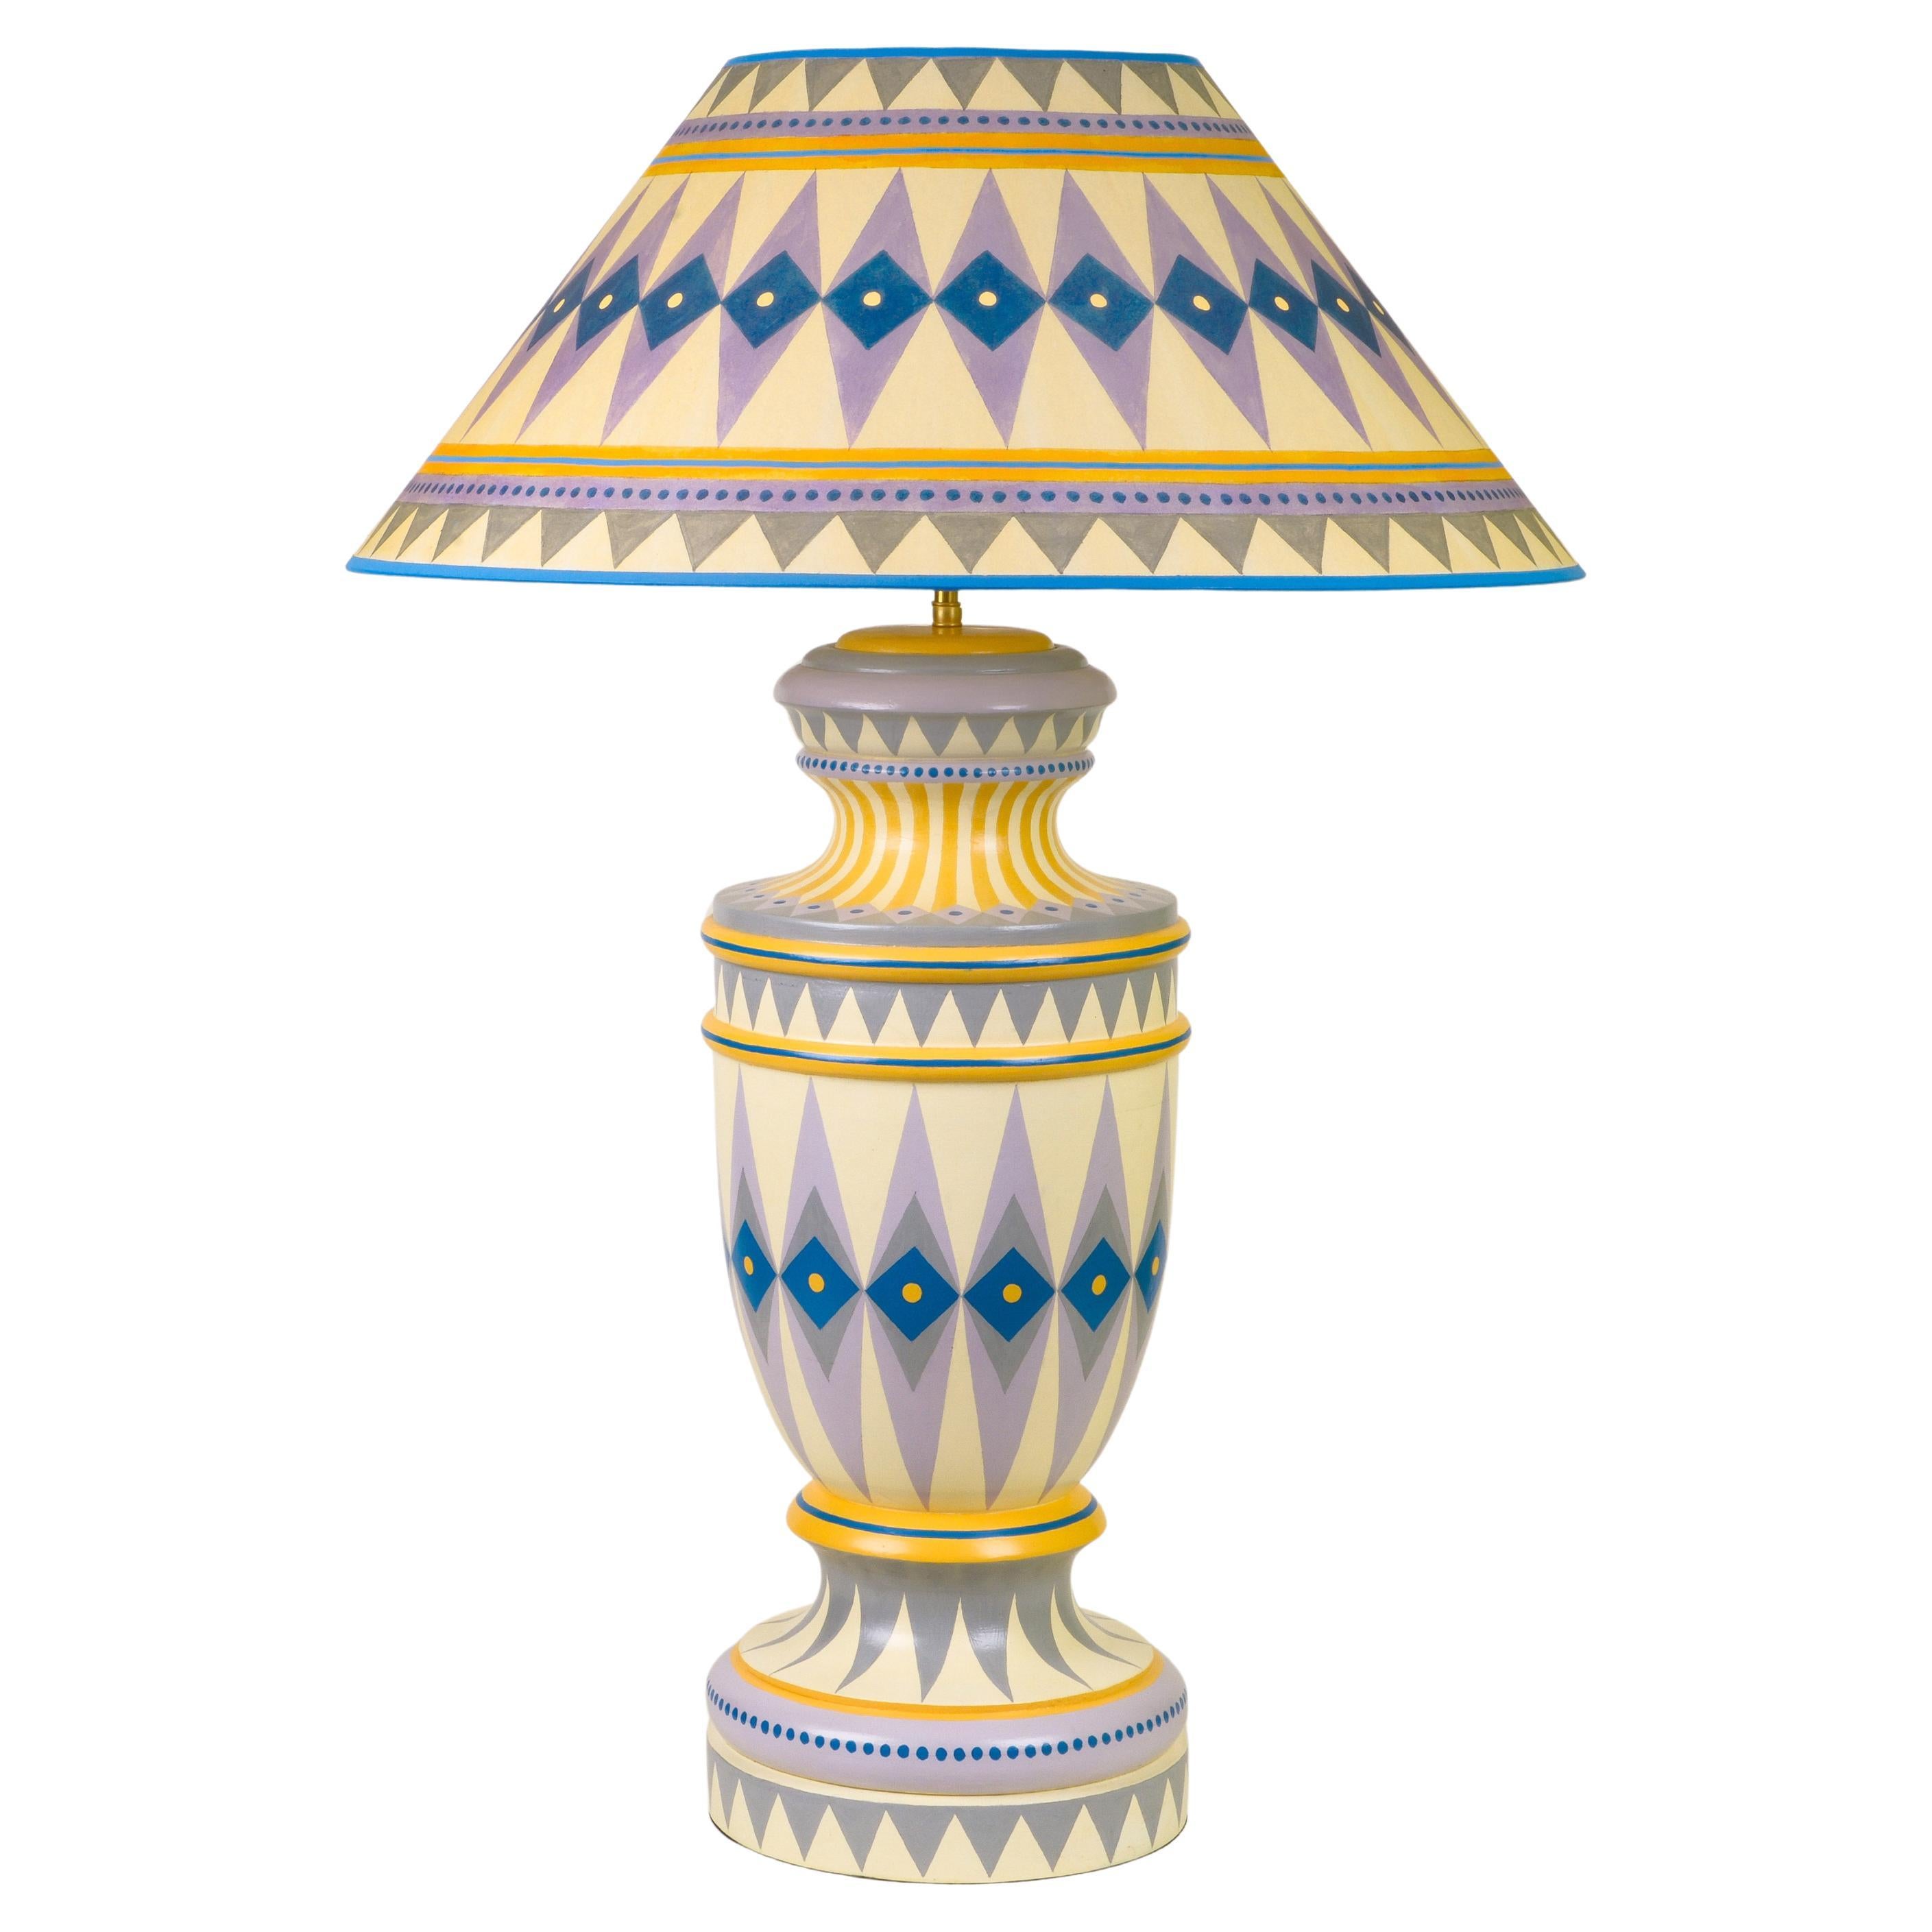 Cressida Bell - 'Harlequin' Table Lamp For Sale